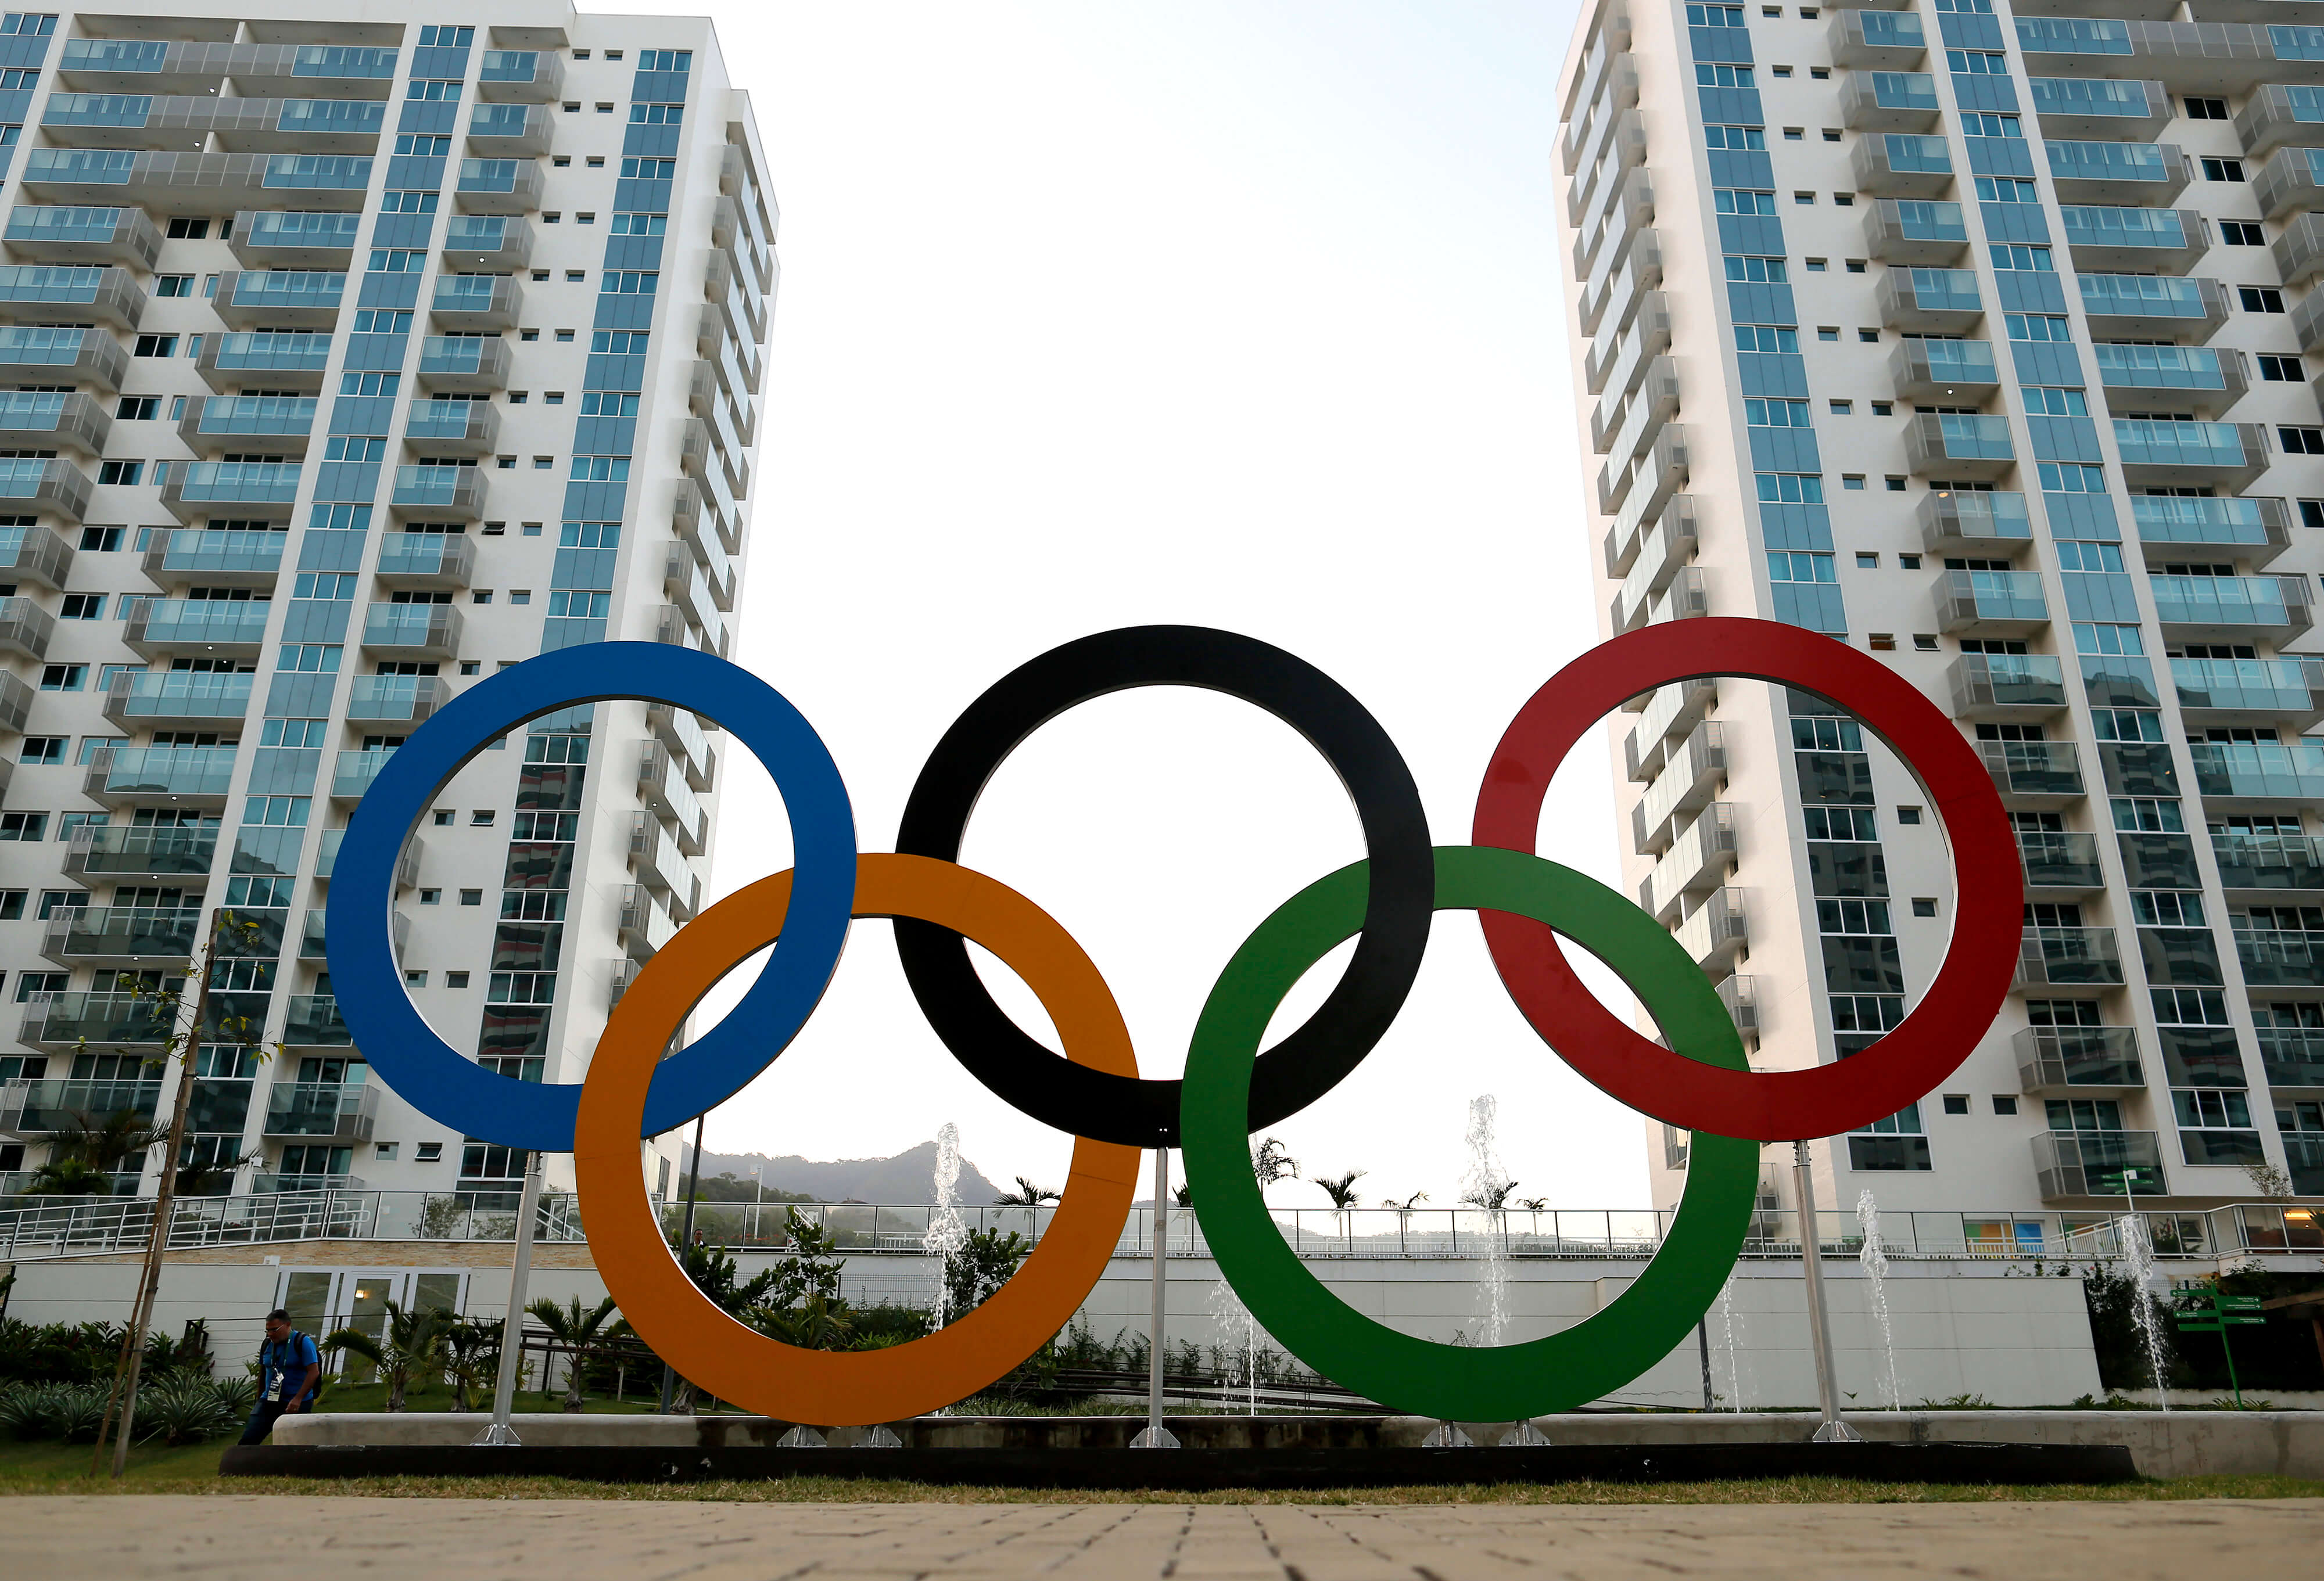 Image of the 5 colorful Olympic rings in the Rio Village